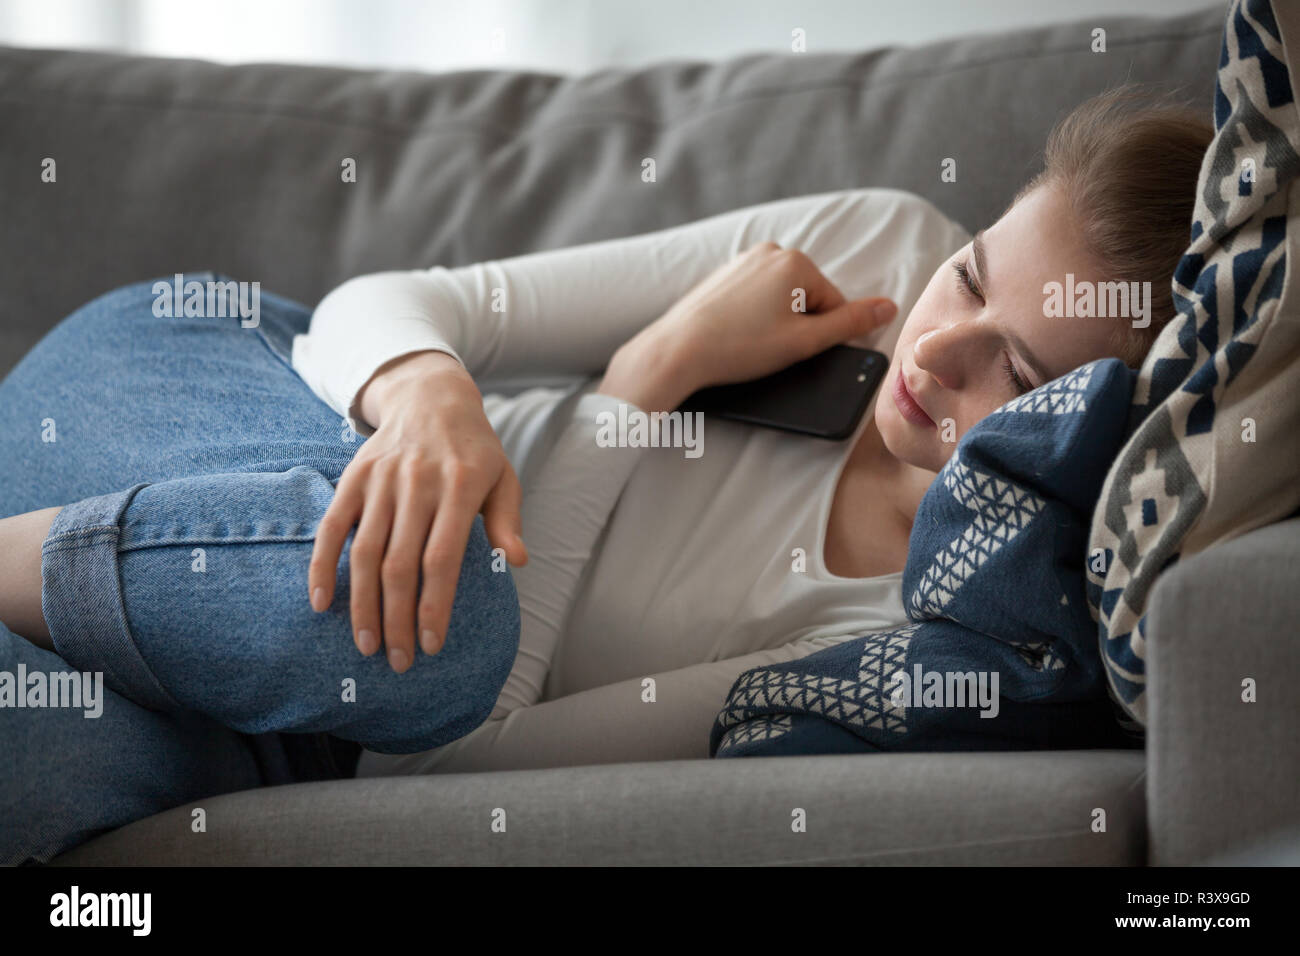 Upset female lying on couch with smartphone in hands Stock Photo